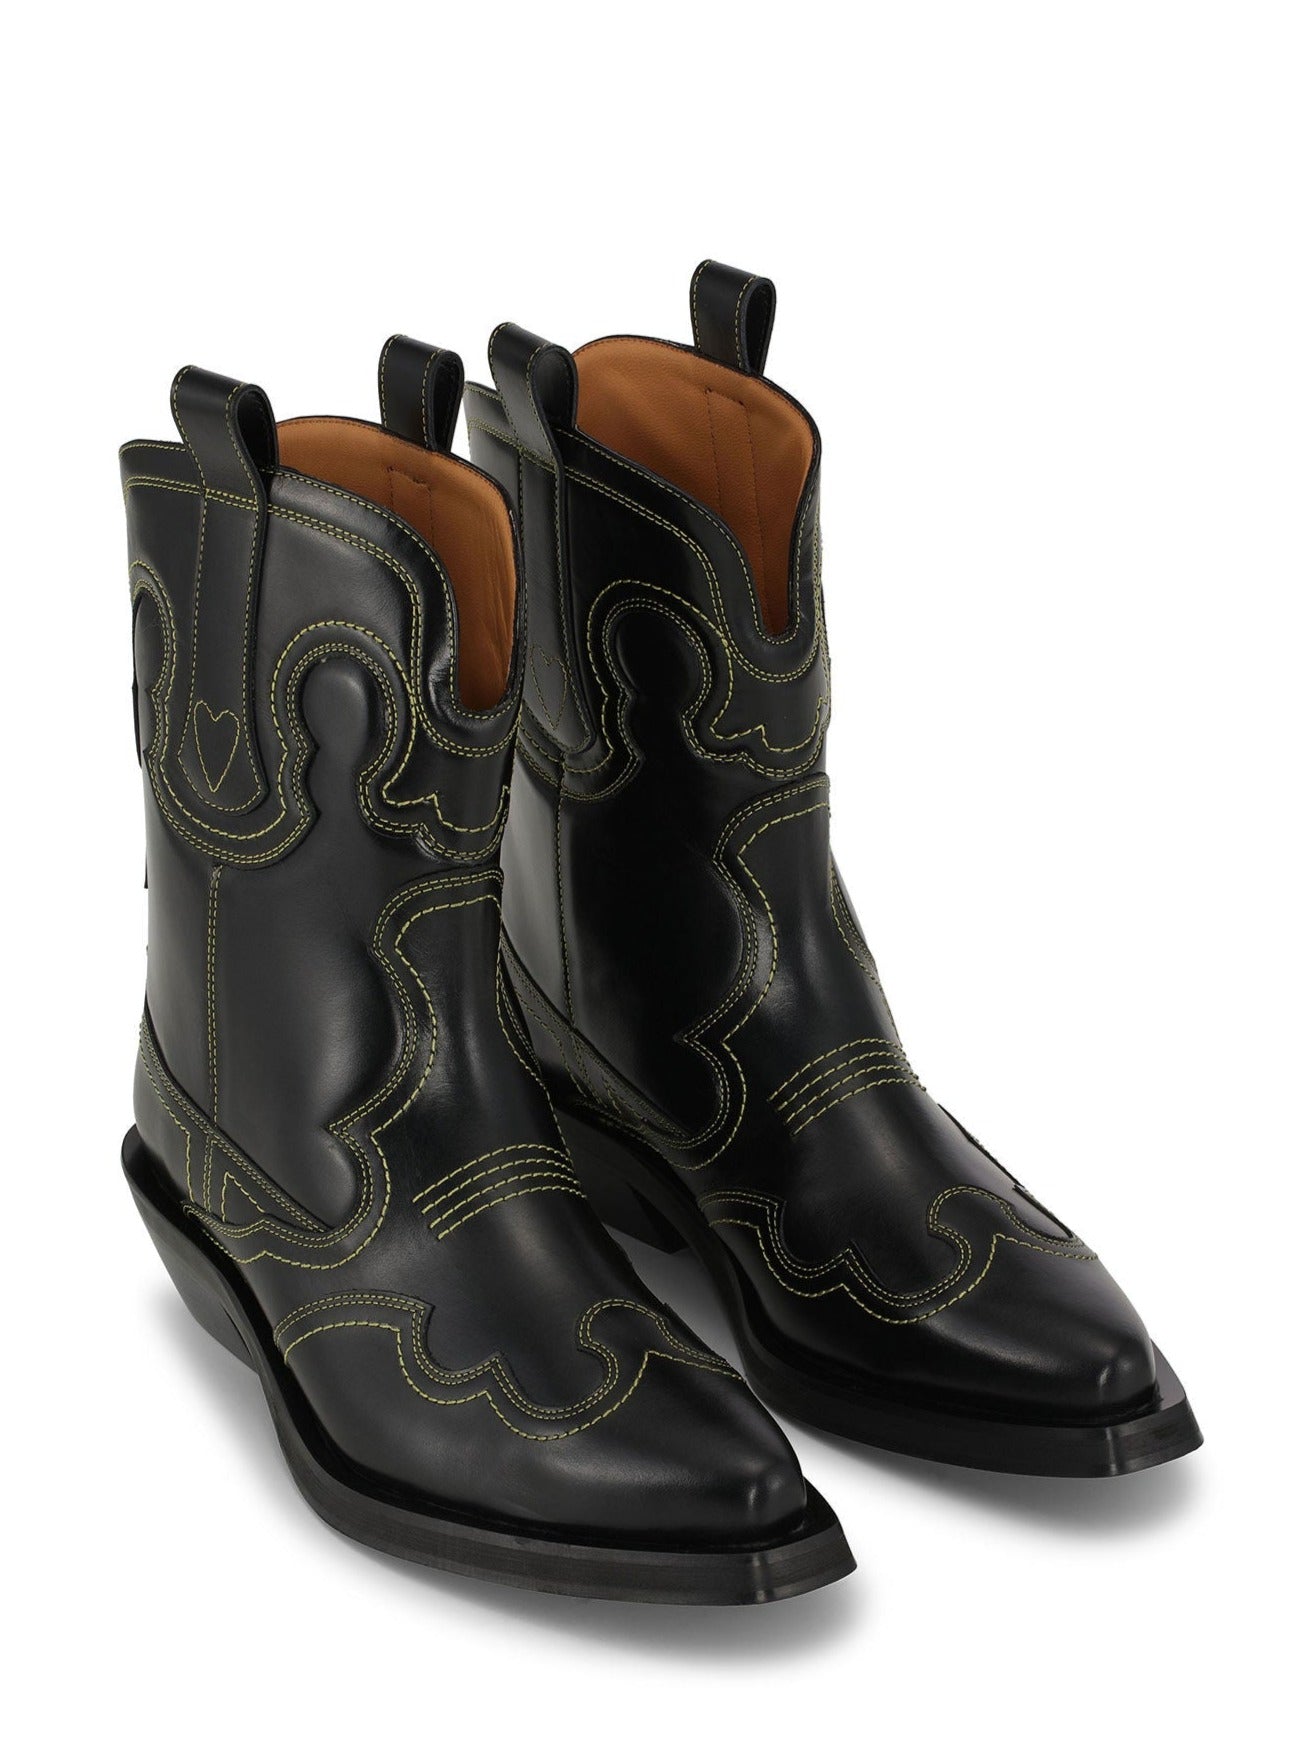 Low shaft embroidered western boots, black-yellow